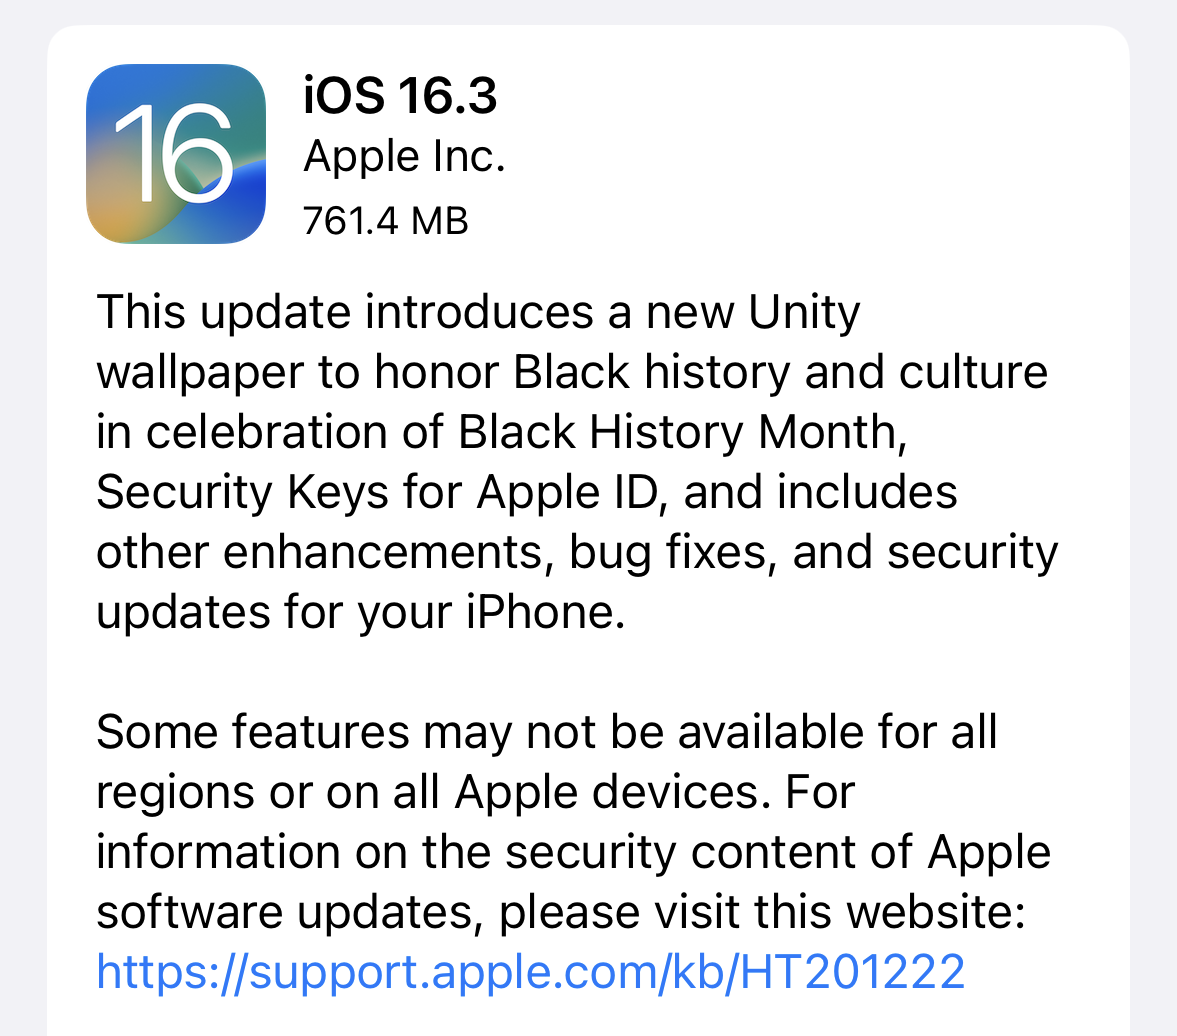 This update introduces a new Unity wallpaper to honor Black history and culture in celebration of Black History Month, Security Keys for Apple ID, and includes other enhancements, bug fixes, and security updates for your iPhone. Some features may not be available for all regions or on all Apple devices.